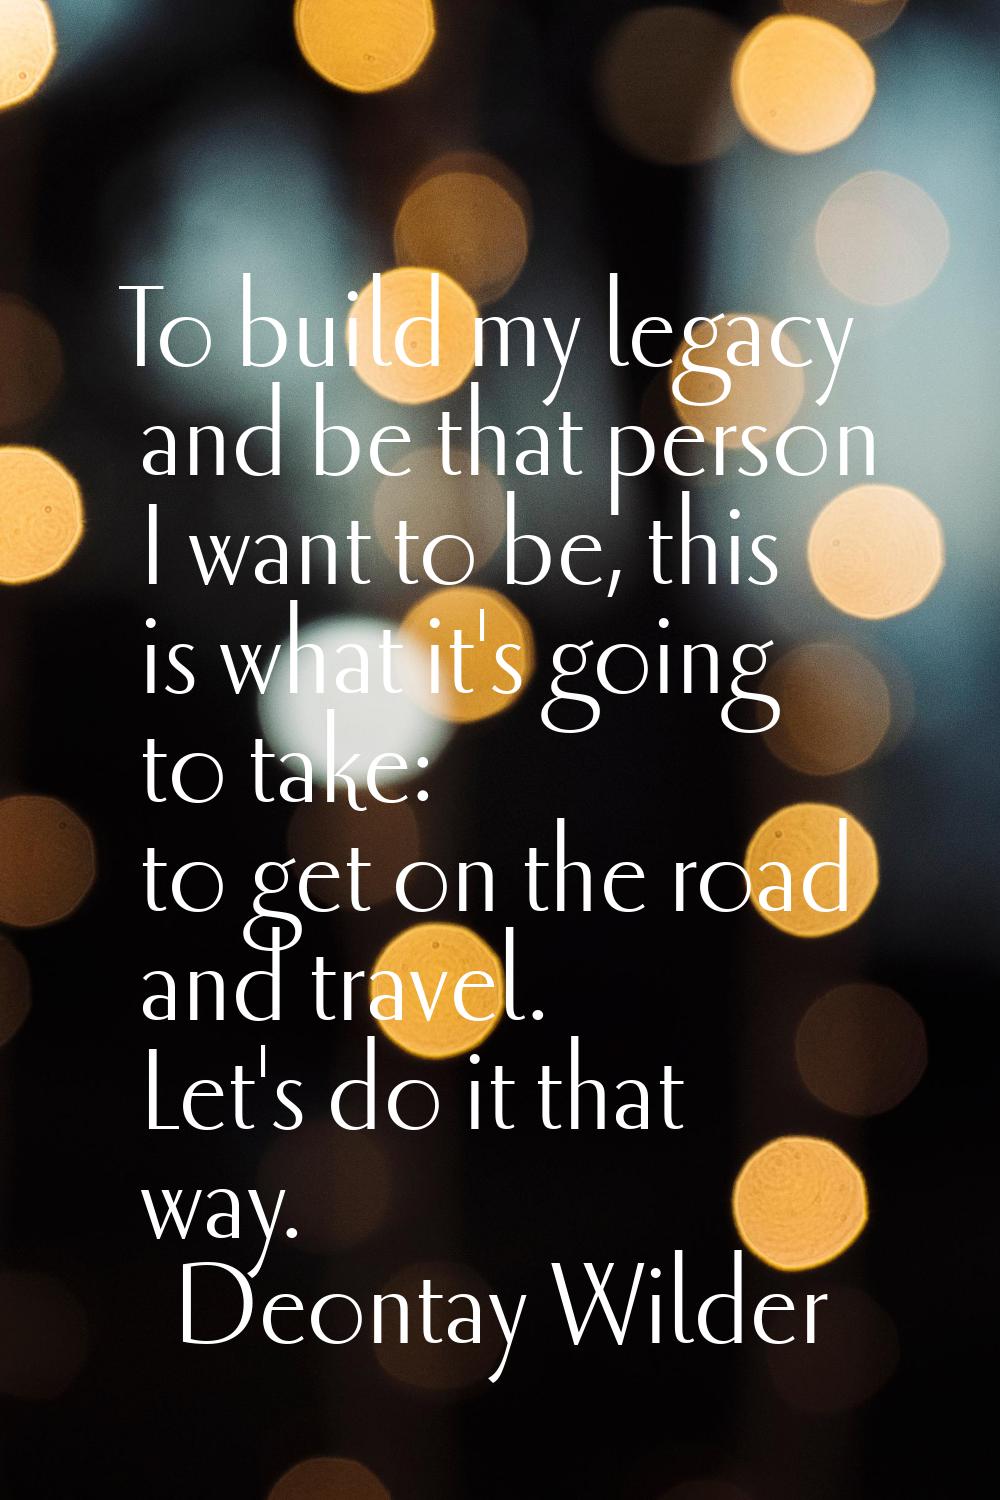 To build my legacy and be that person I want to be, this is what it's going to take: to get on the 